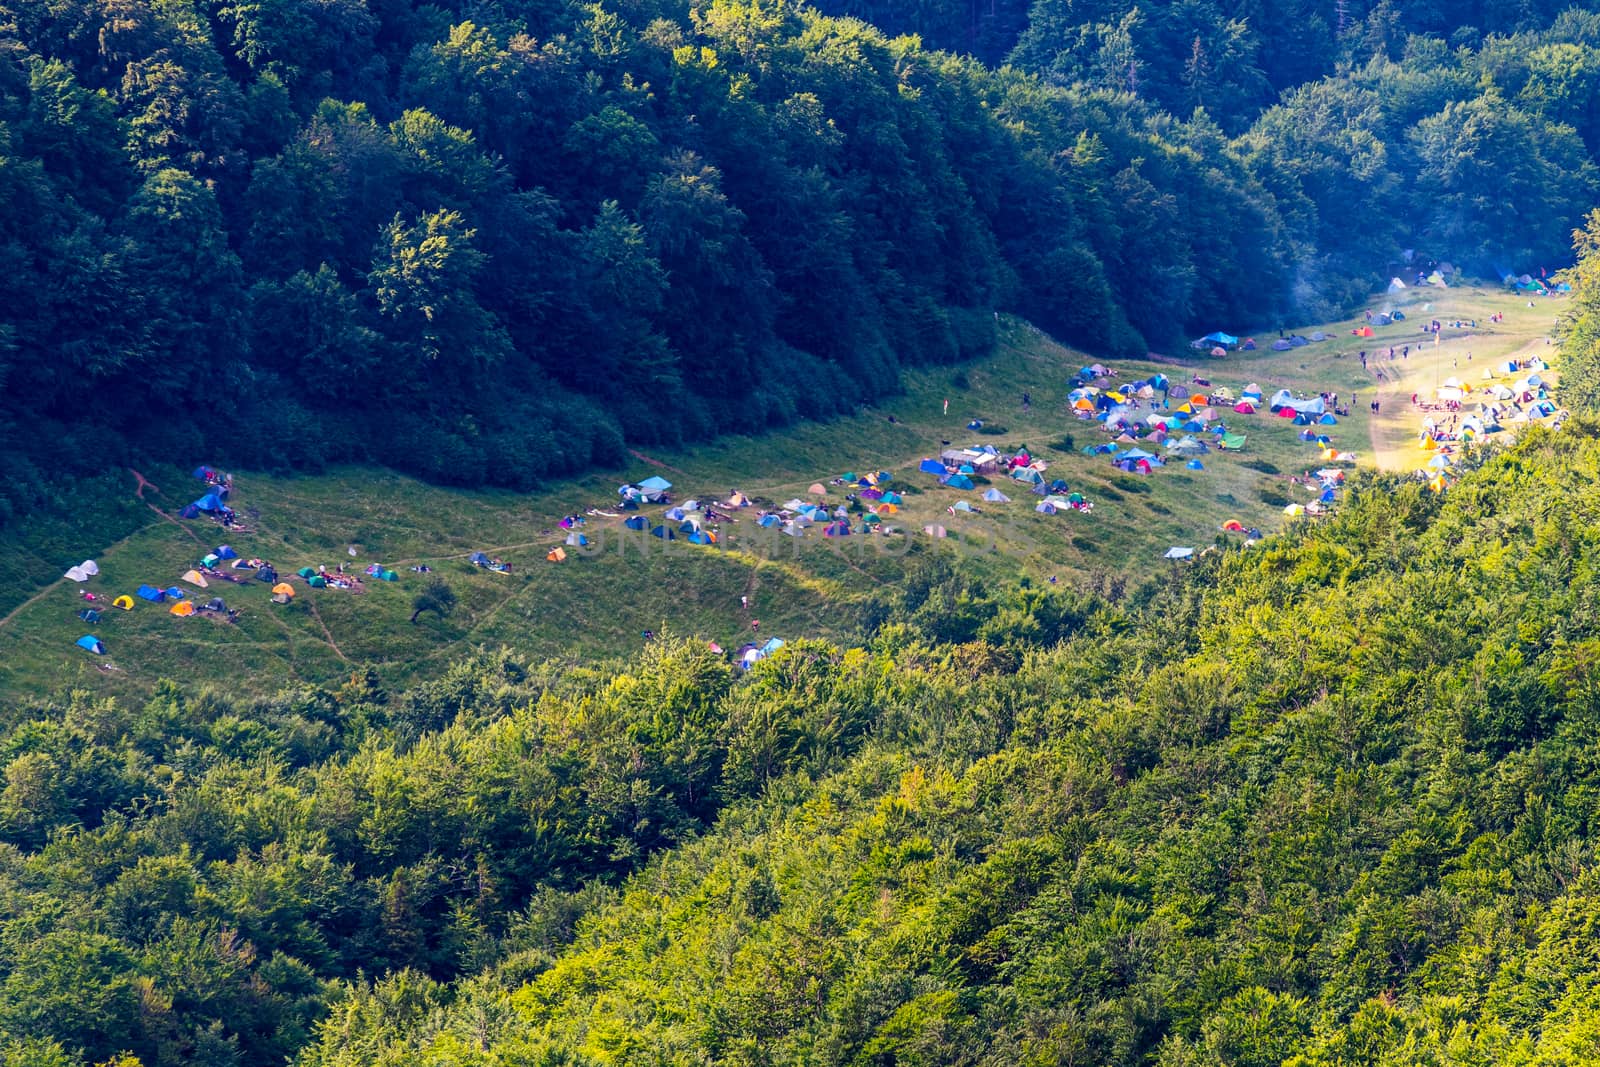 Multicolored spots on the green grass in the valley between the slopes of the overgrown trees is a tent camp located there.